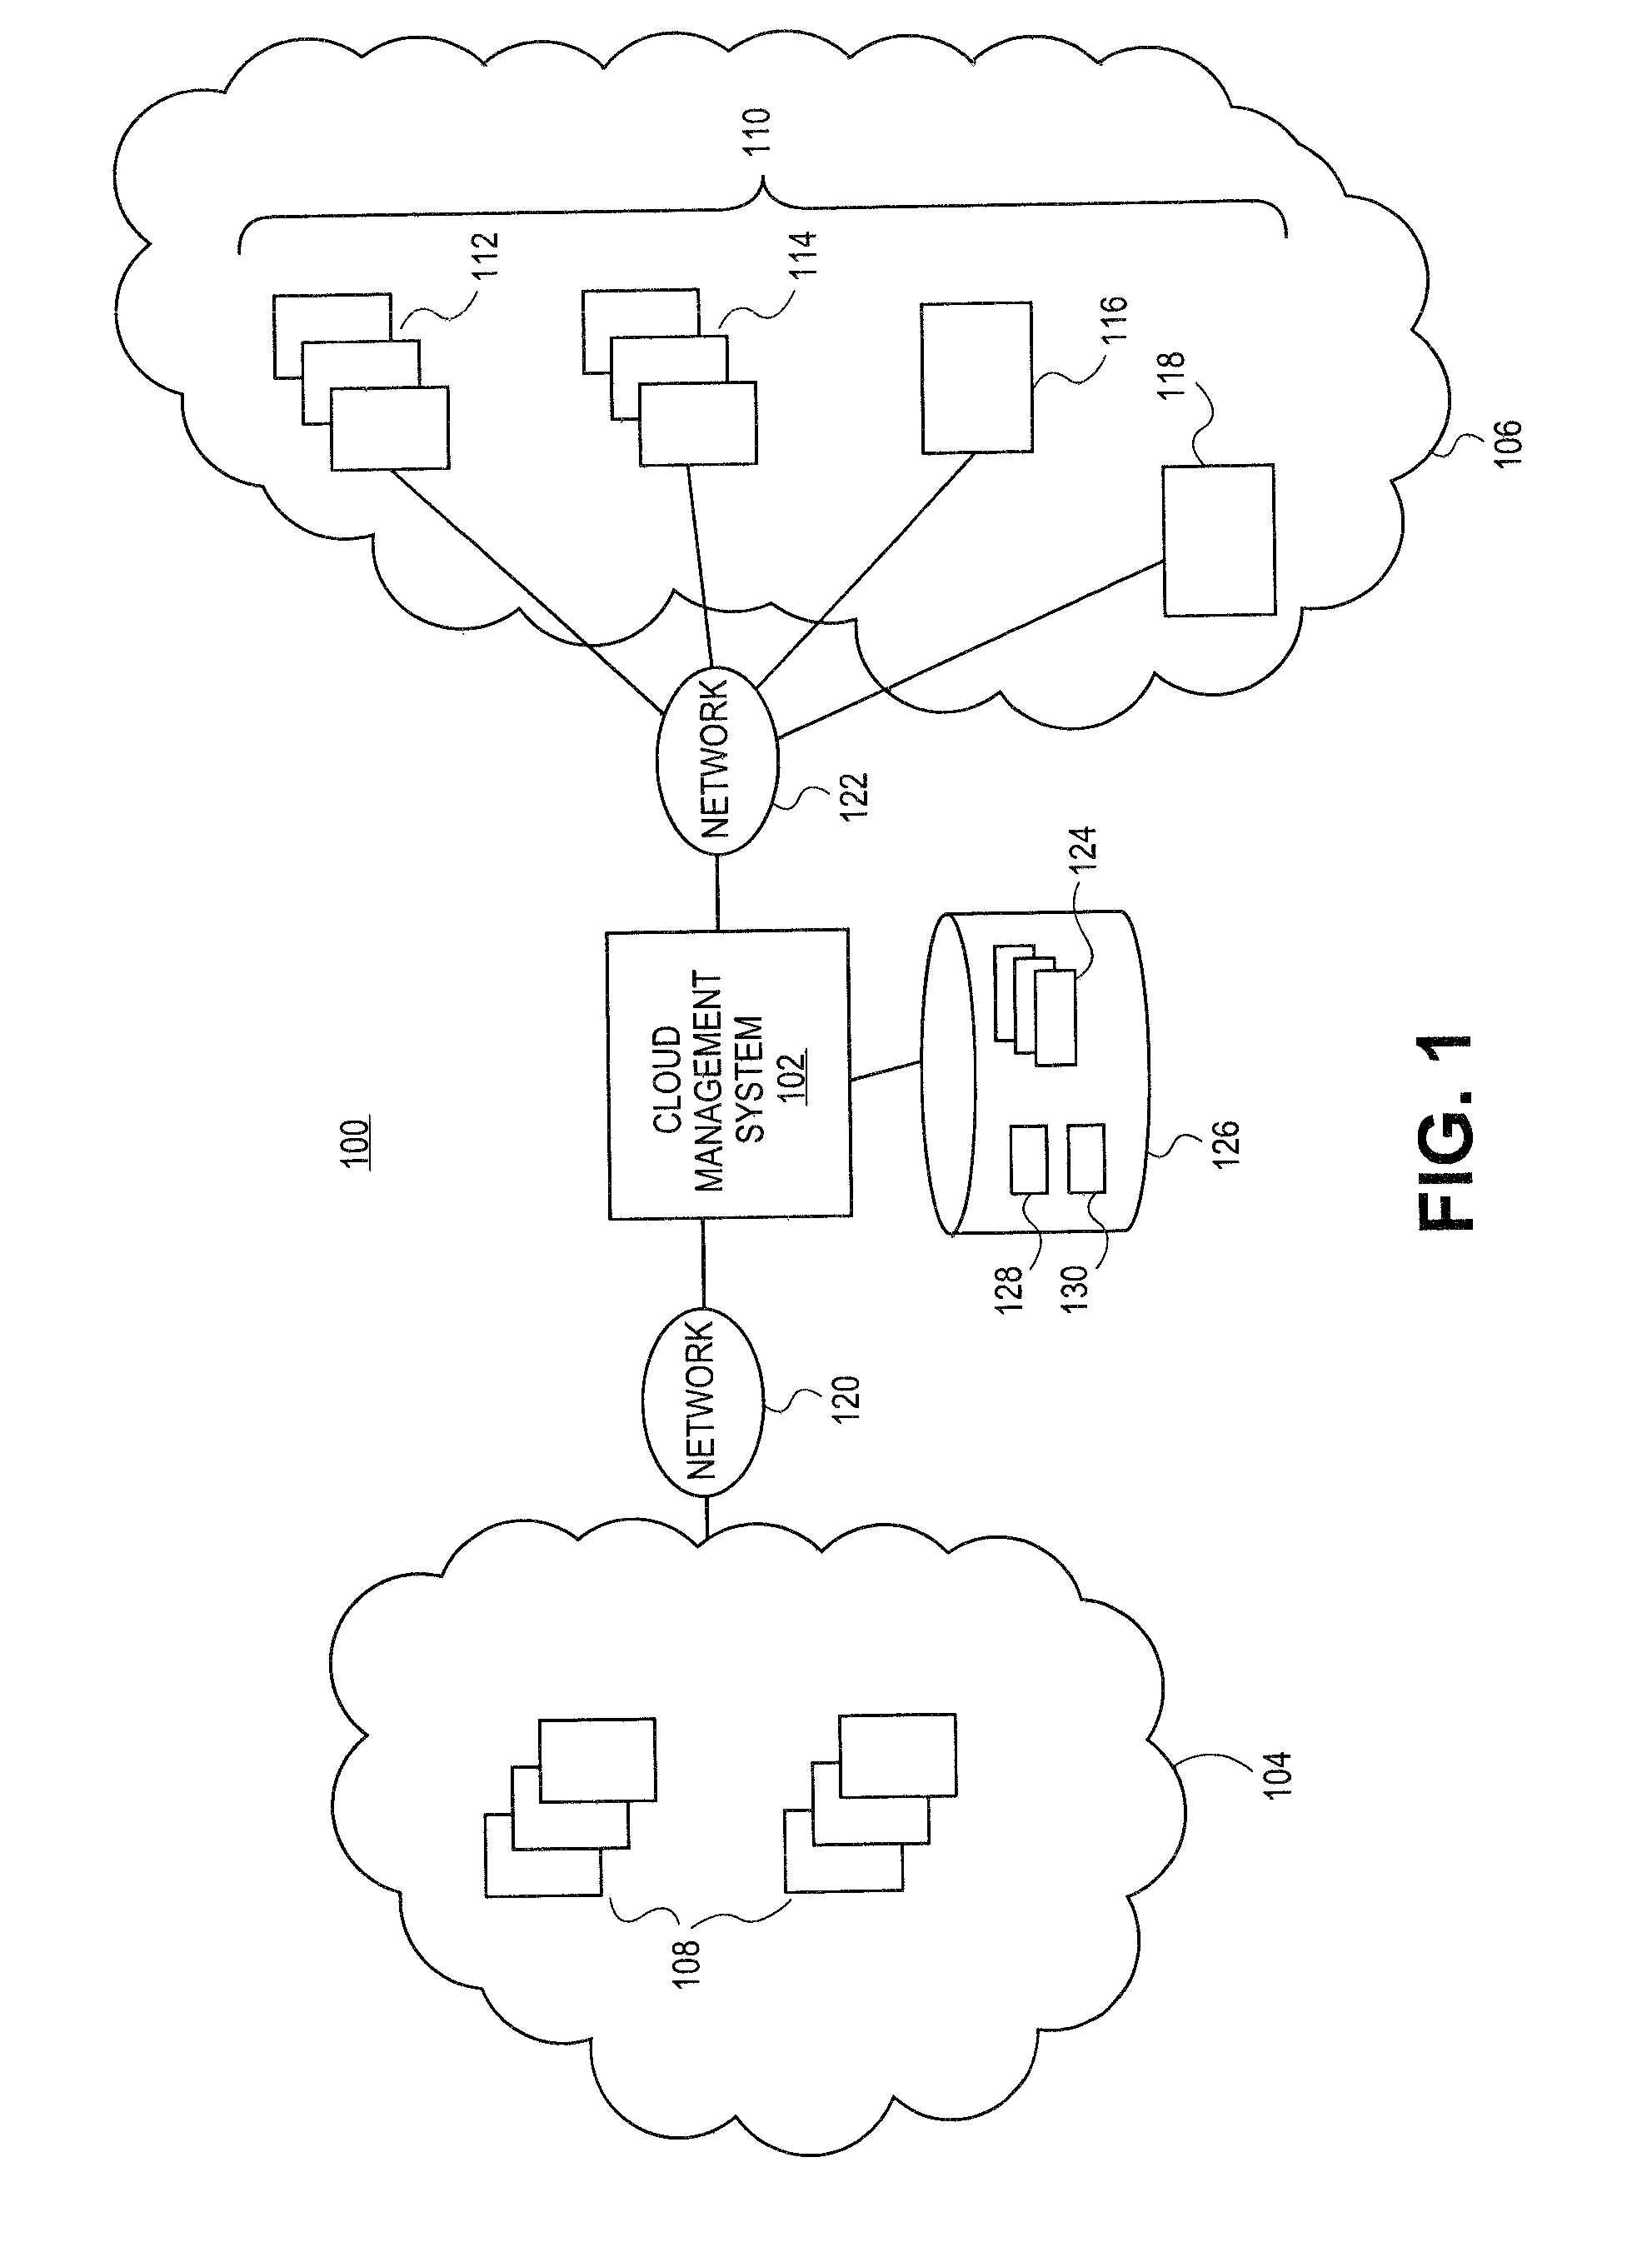 Methods and systems for cloud management using multiple cloud management schemes to allow communication between independently controlled clouds